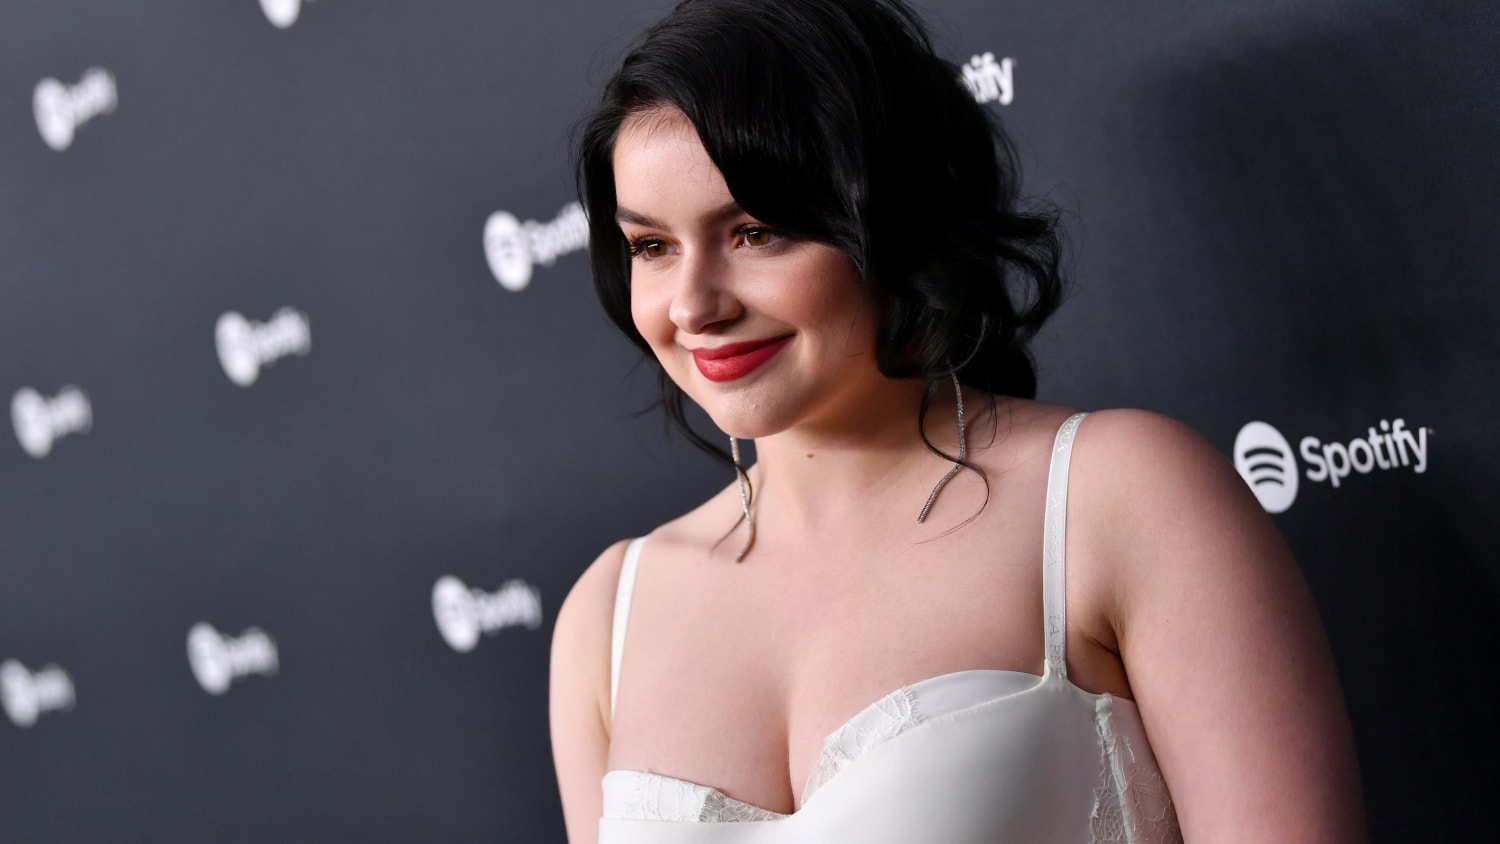 Goodbye, 'Modern Family'! Ariel Winter reveals new hairstyle days after hit sitcom wrapped